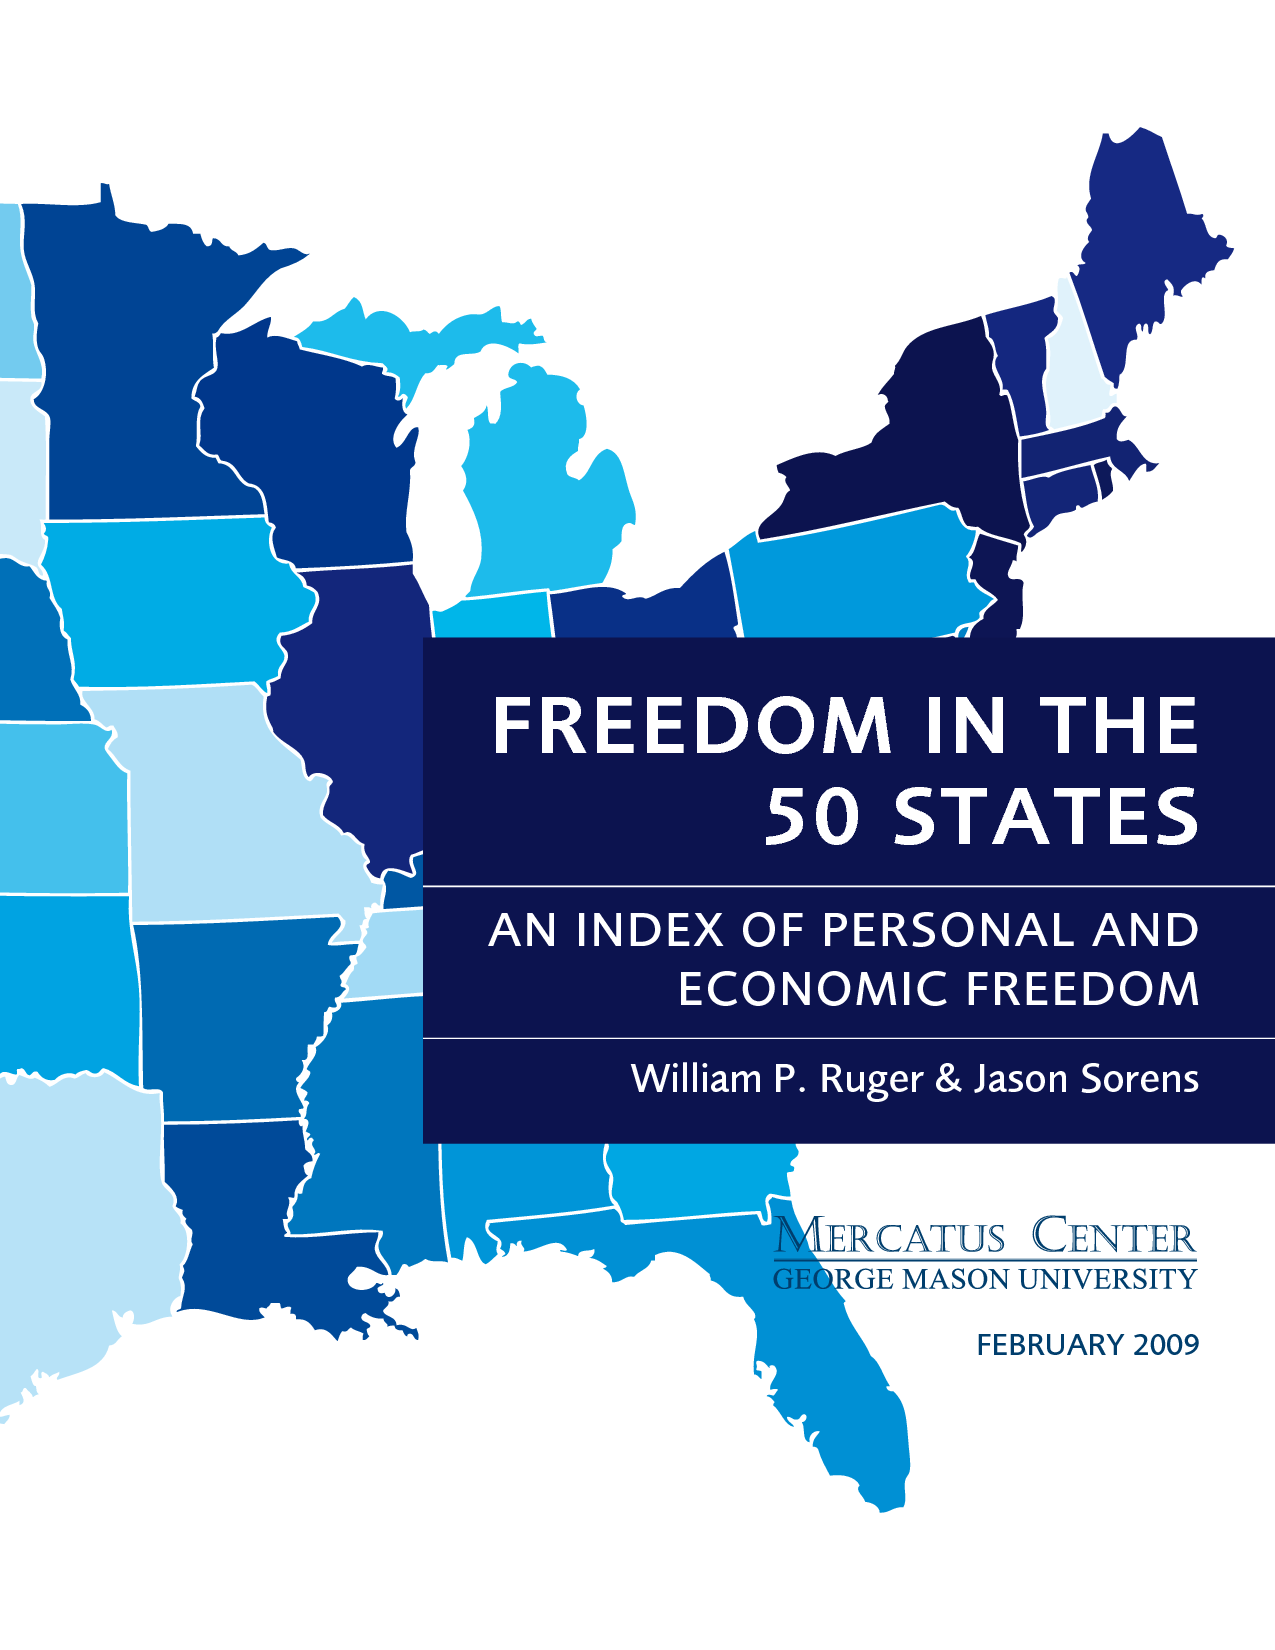 Freedom in the 50 States